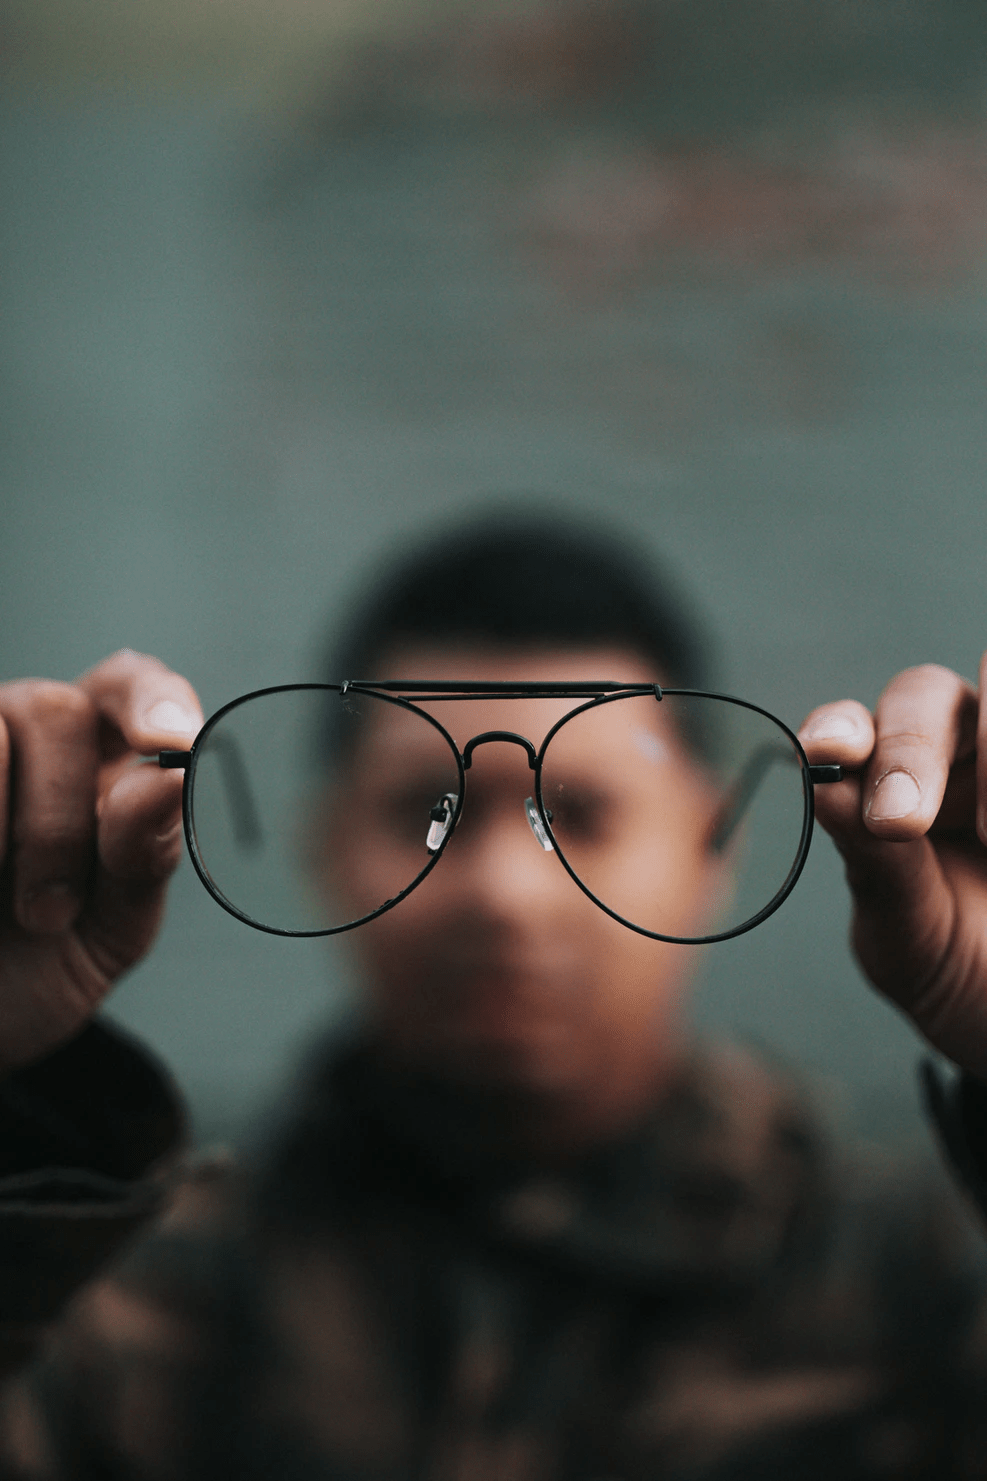 *The image is of a person holding up a pair of glasses away from their face. Photographer - Nathan Dumlao via UnSplash